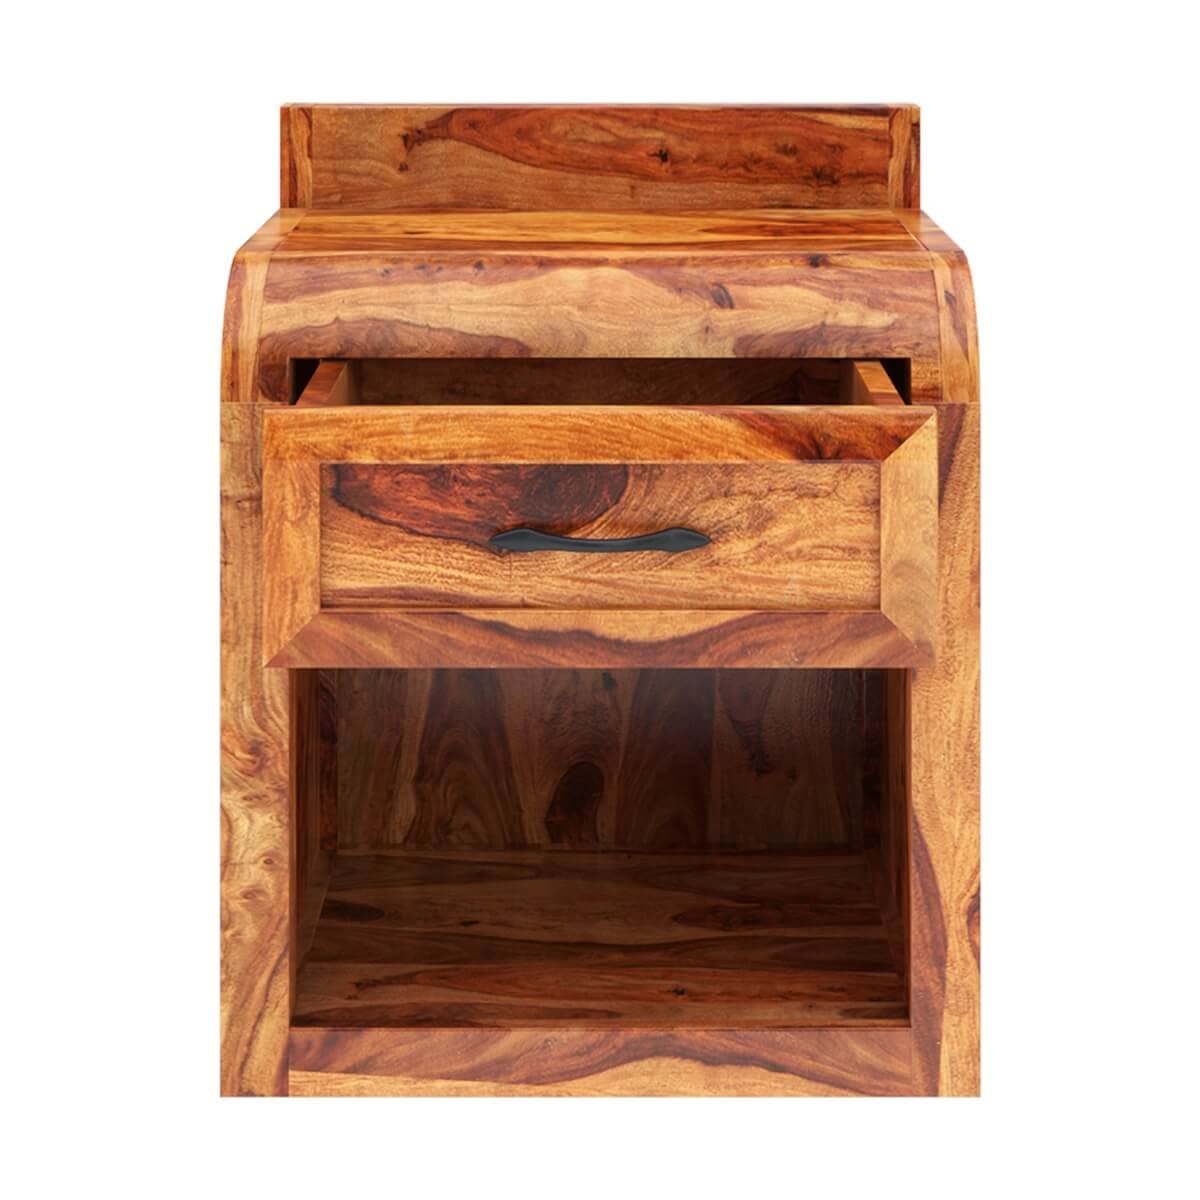 Woodmarwar Solid Sheesham Wood Bedside Table for Bedroom | Solid Pure Wooden Bed Side Nightstand End Table with 1 Drawer & 1 Open Shelf Storage for Home & Bed Room